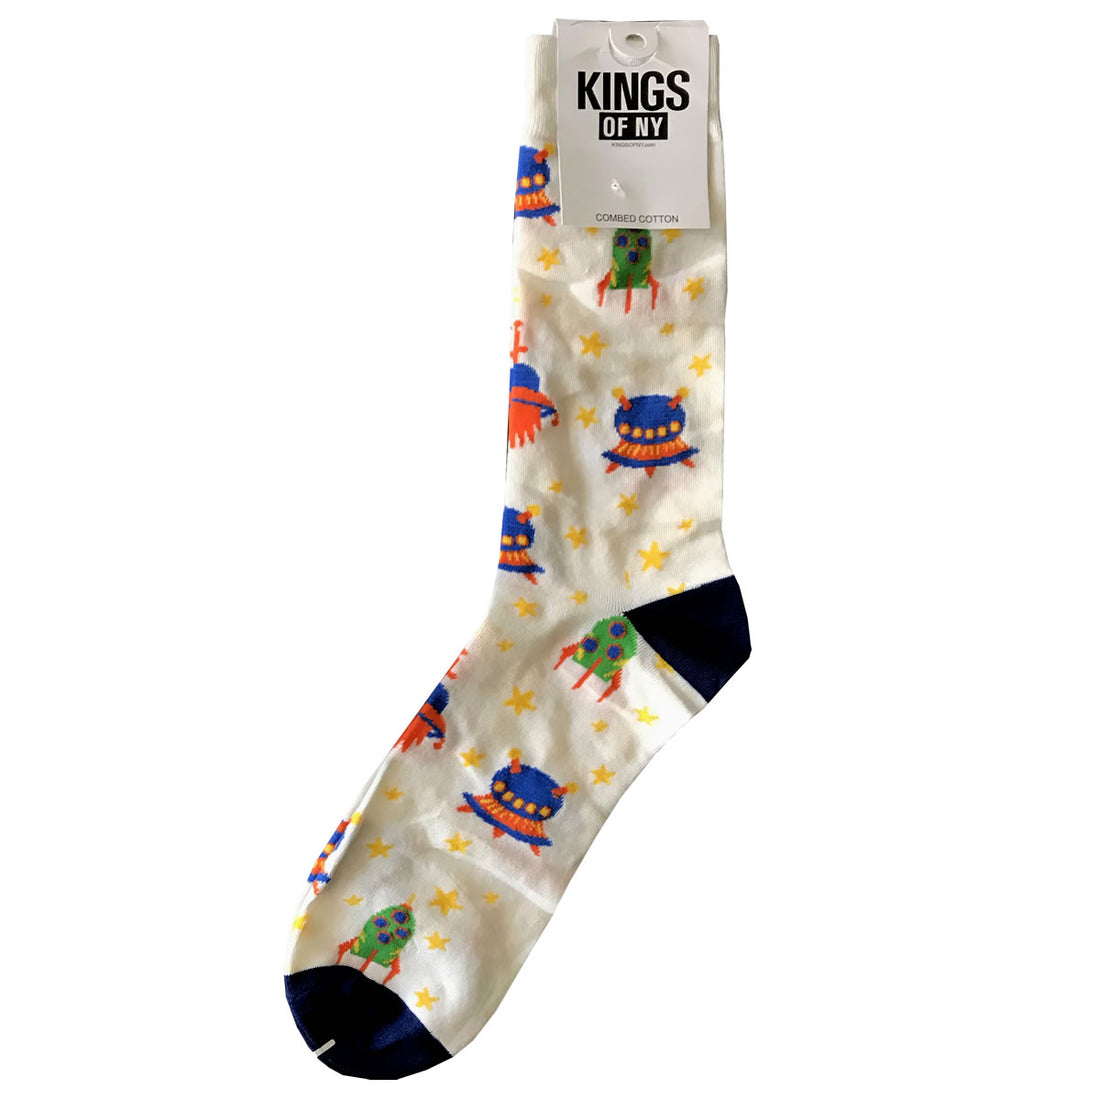 White Spaceship Ufo Alien Mens Cotton Socks by KINGS OF NY